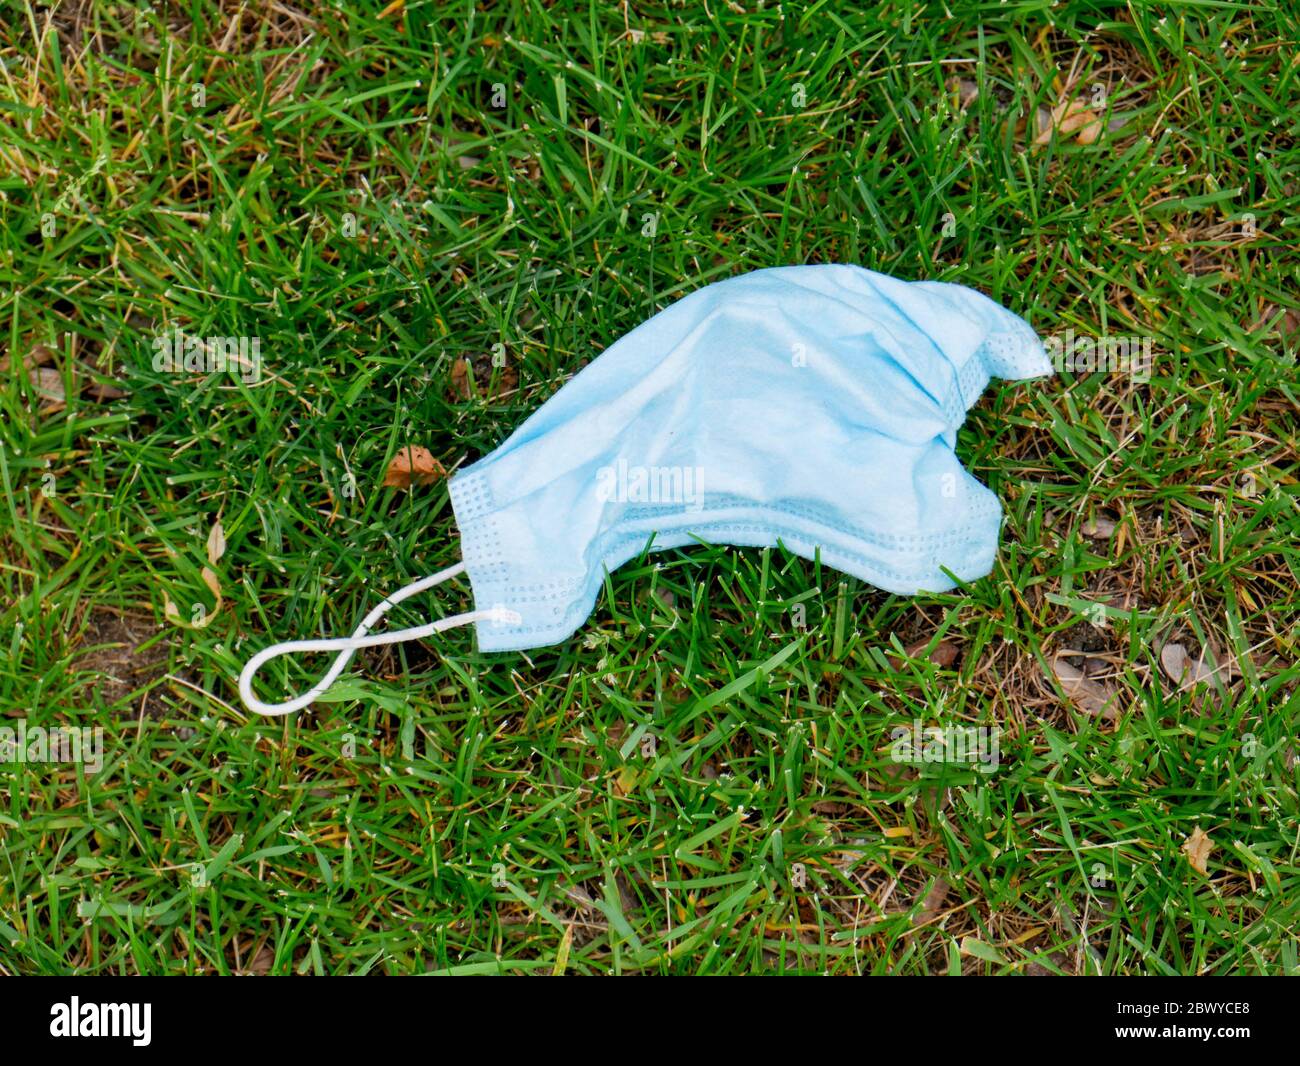 Surgical mask discarded on lawn during COVID-19 pandemic. Stock Photo